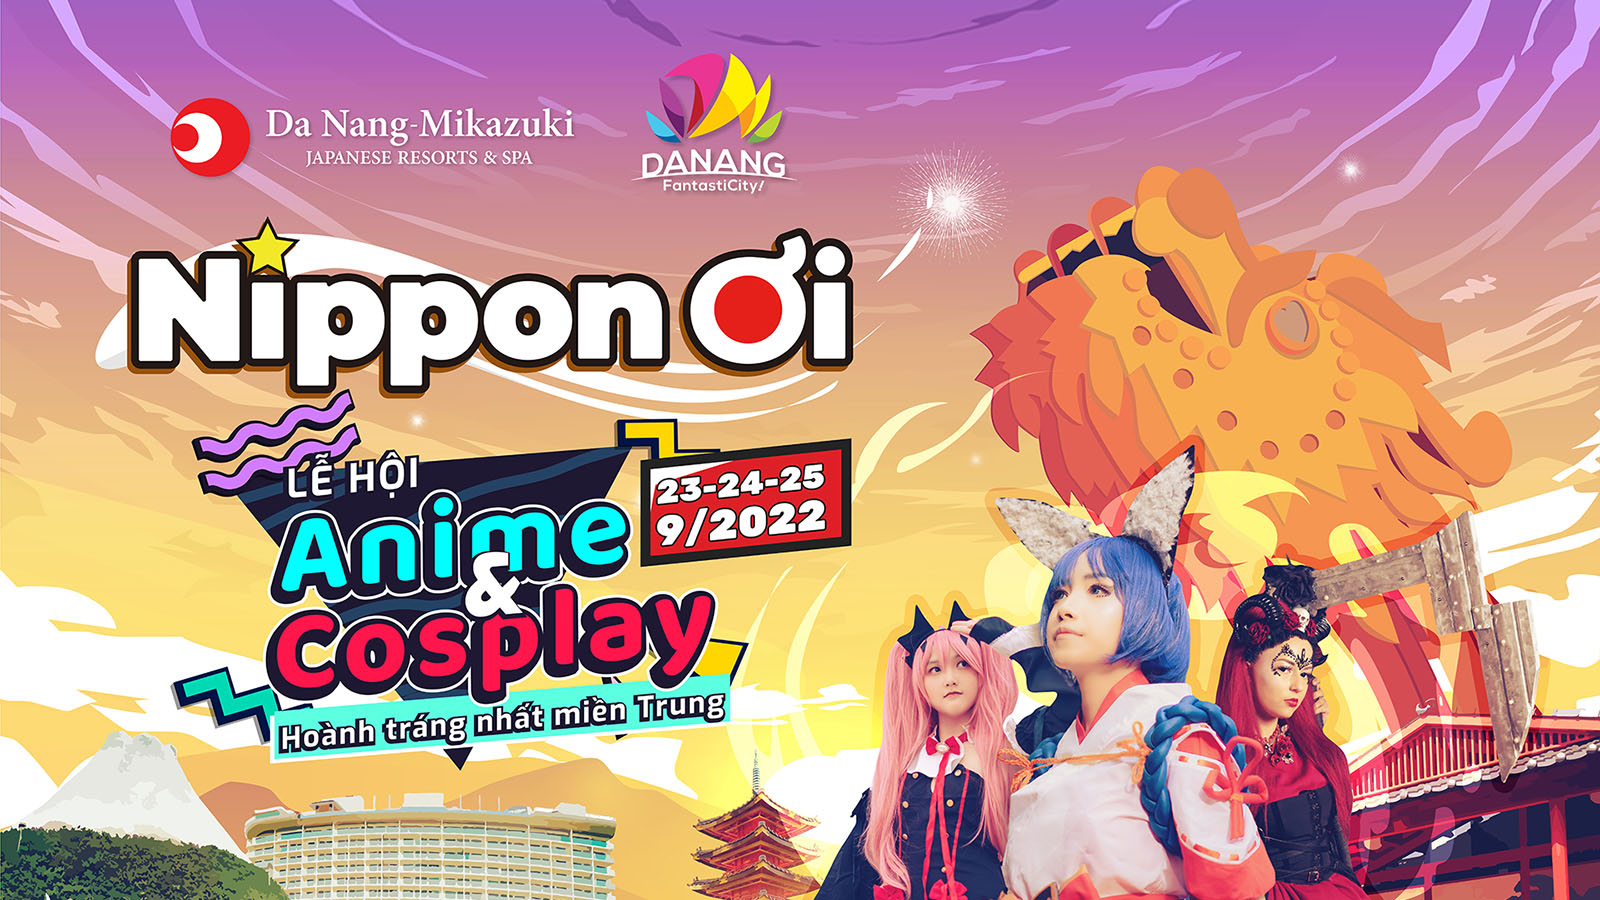 NIPPON OI – The Biggest Cosplay, Anime, And Manga Festival In Central Vietnam Is Back!